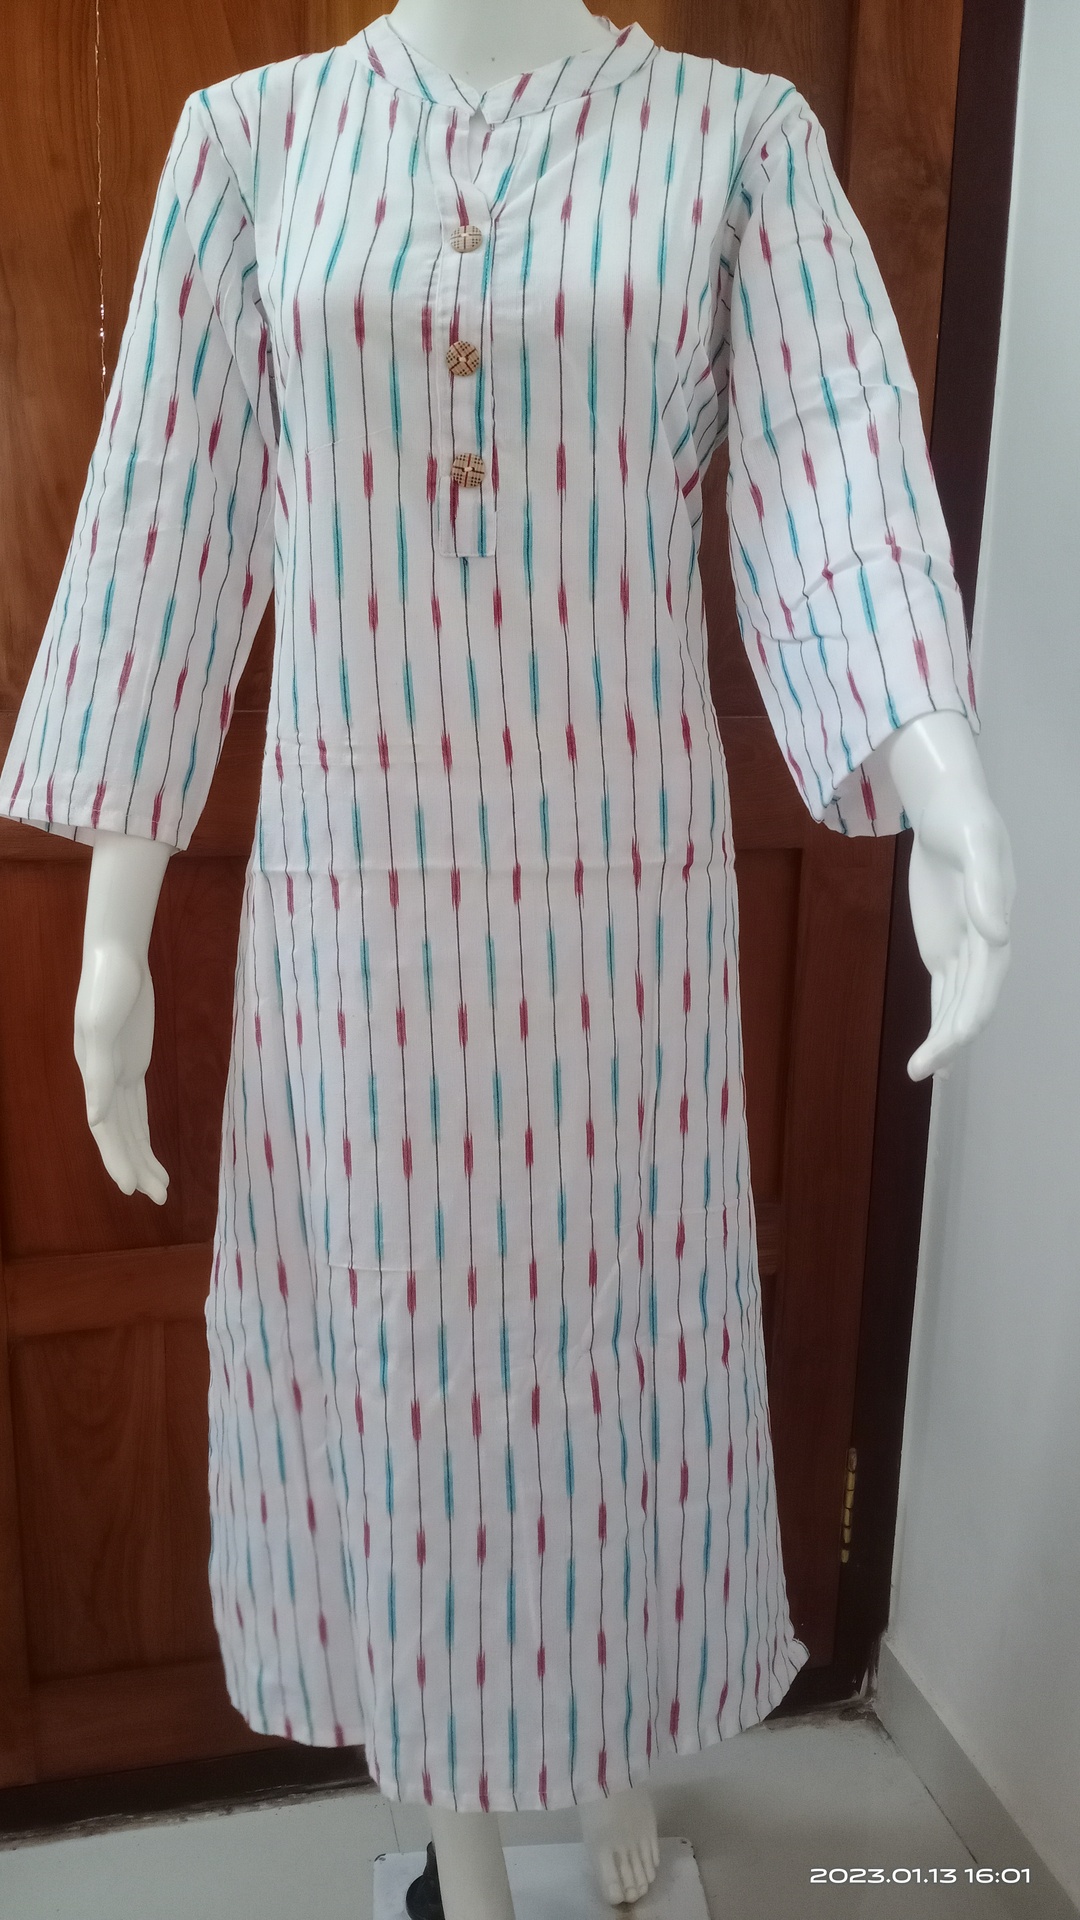 White Ikkat Kurti with Blue red lines